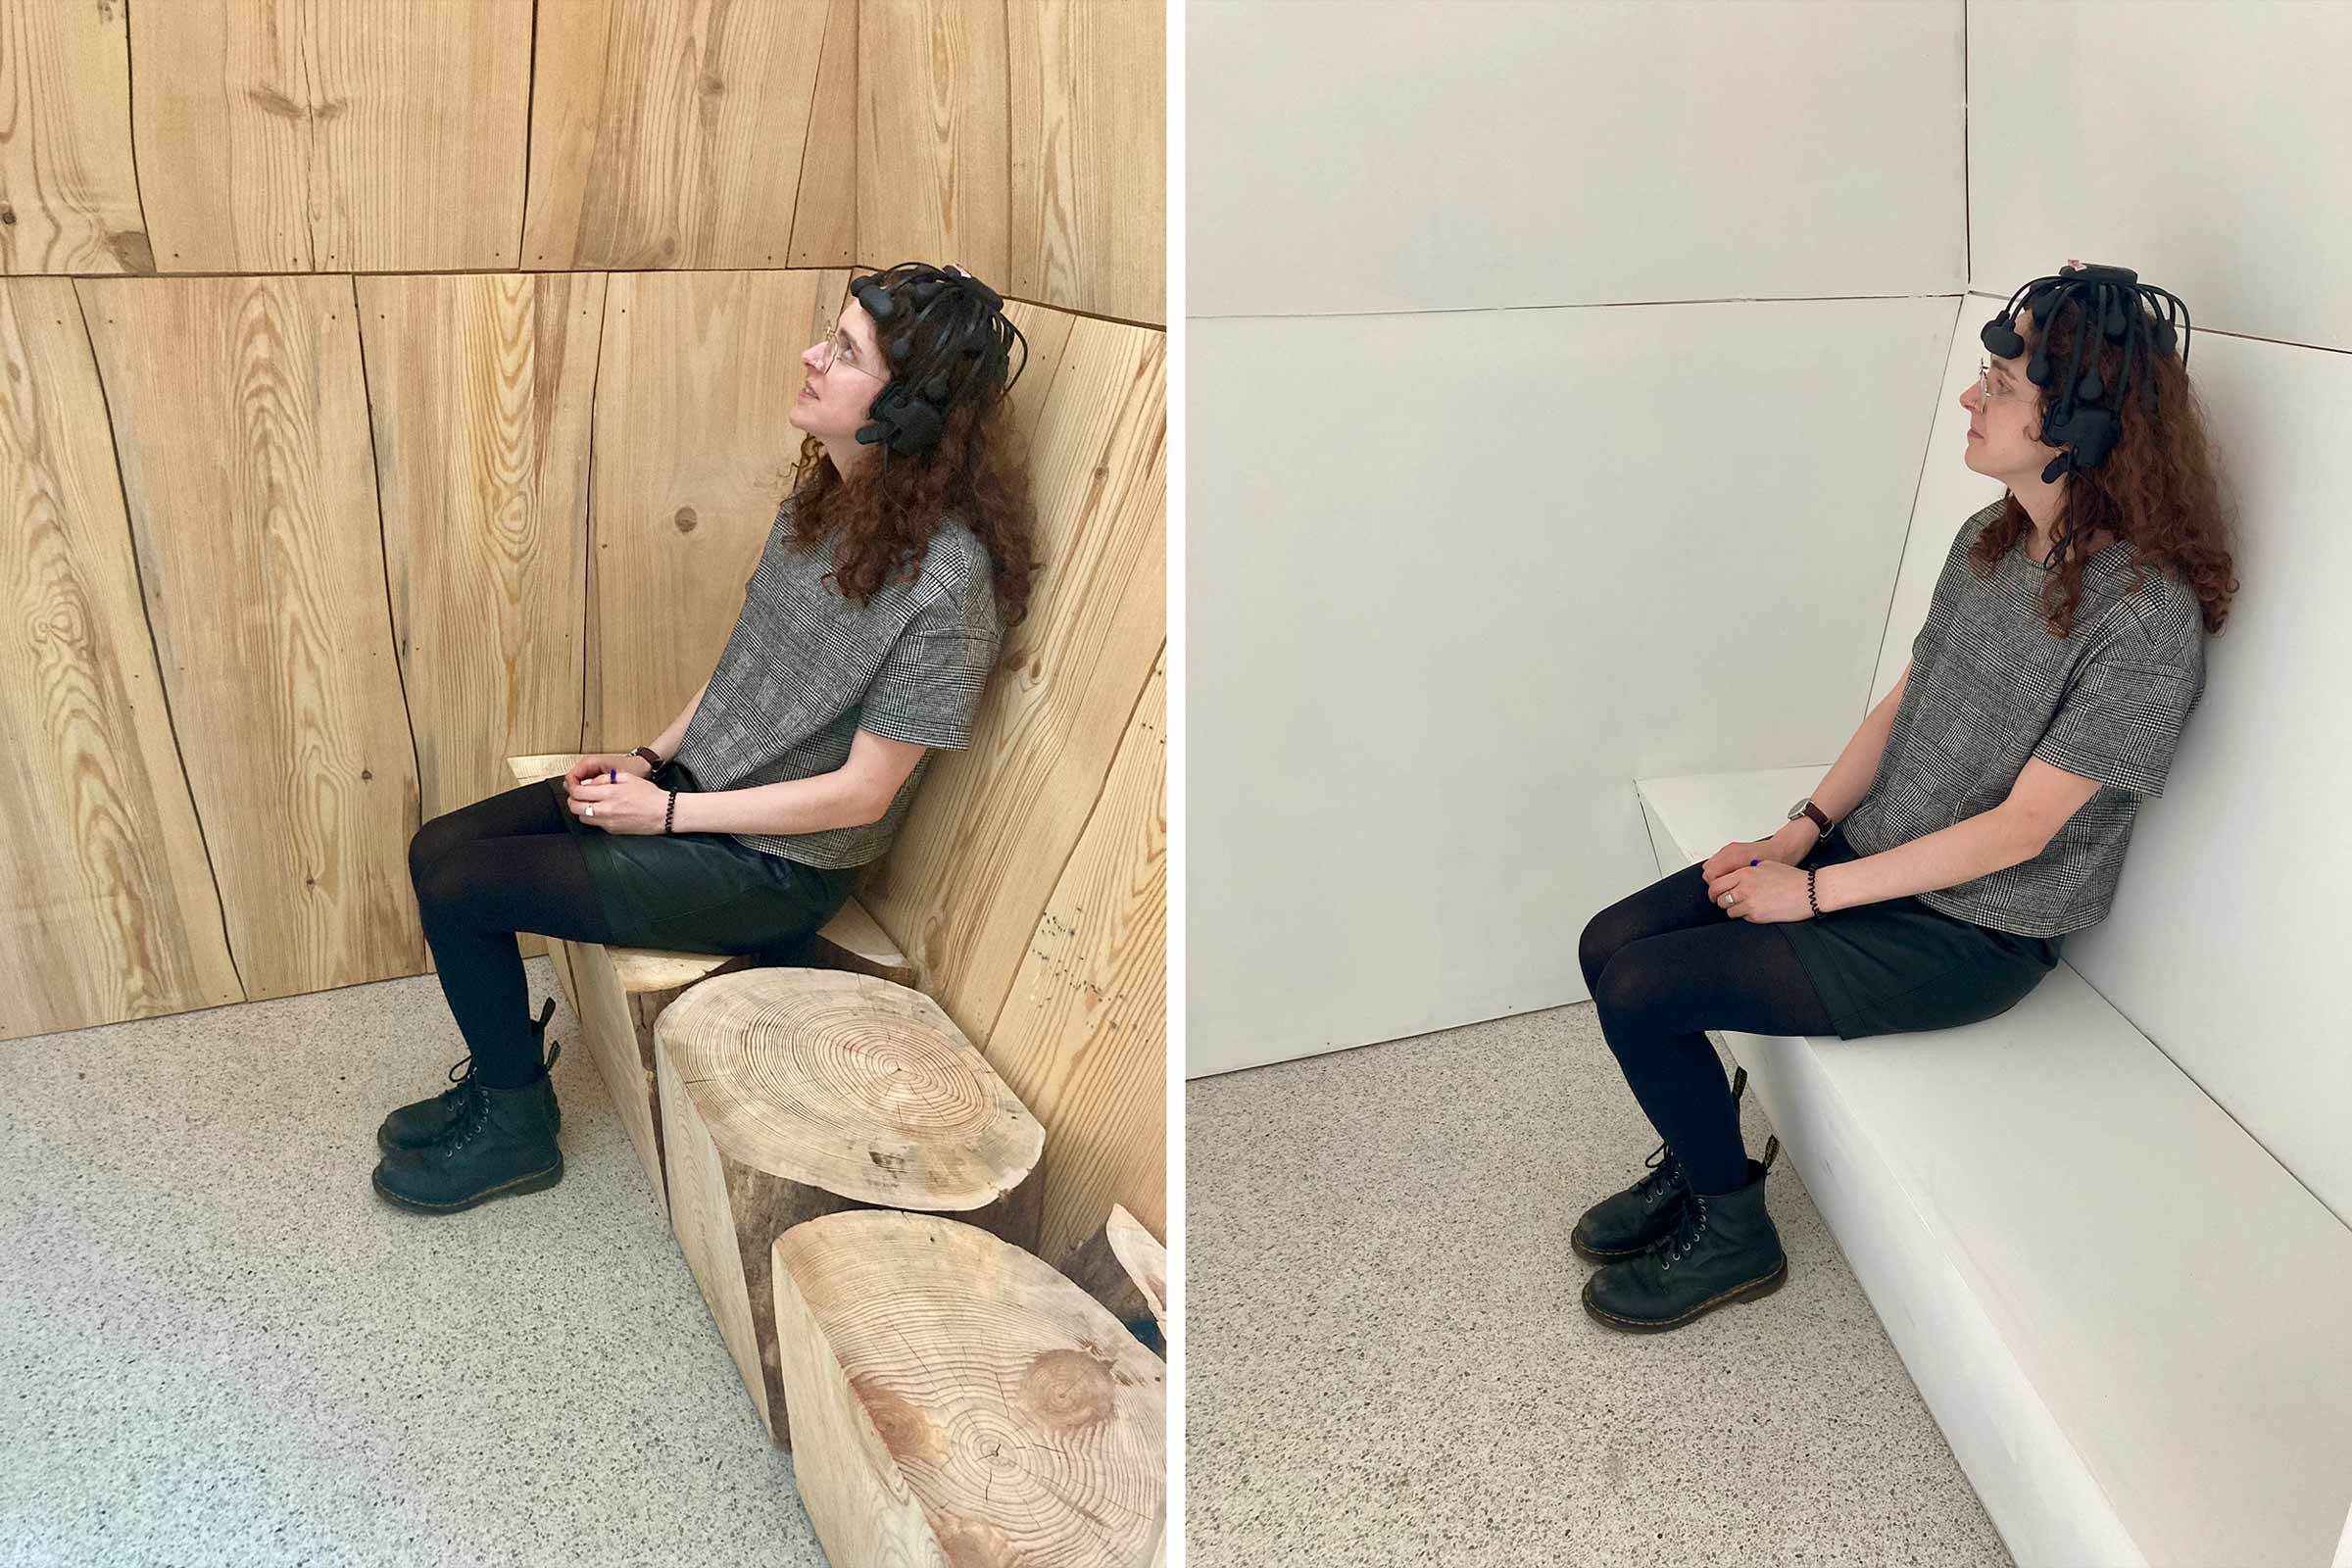 Liz Nigro, a doctoral student at the School of Education and Human Development, sits in the wood chamber and the drywall chamber, wearing an electrode headset to monitor her reactions to the environments. 